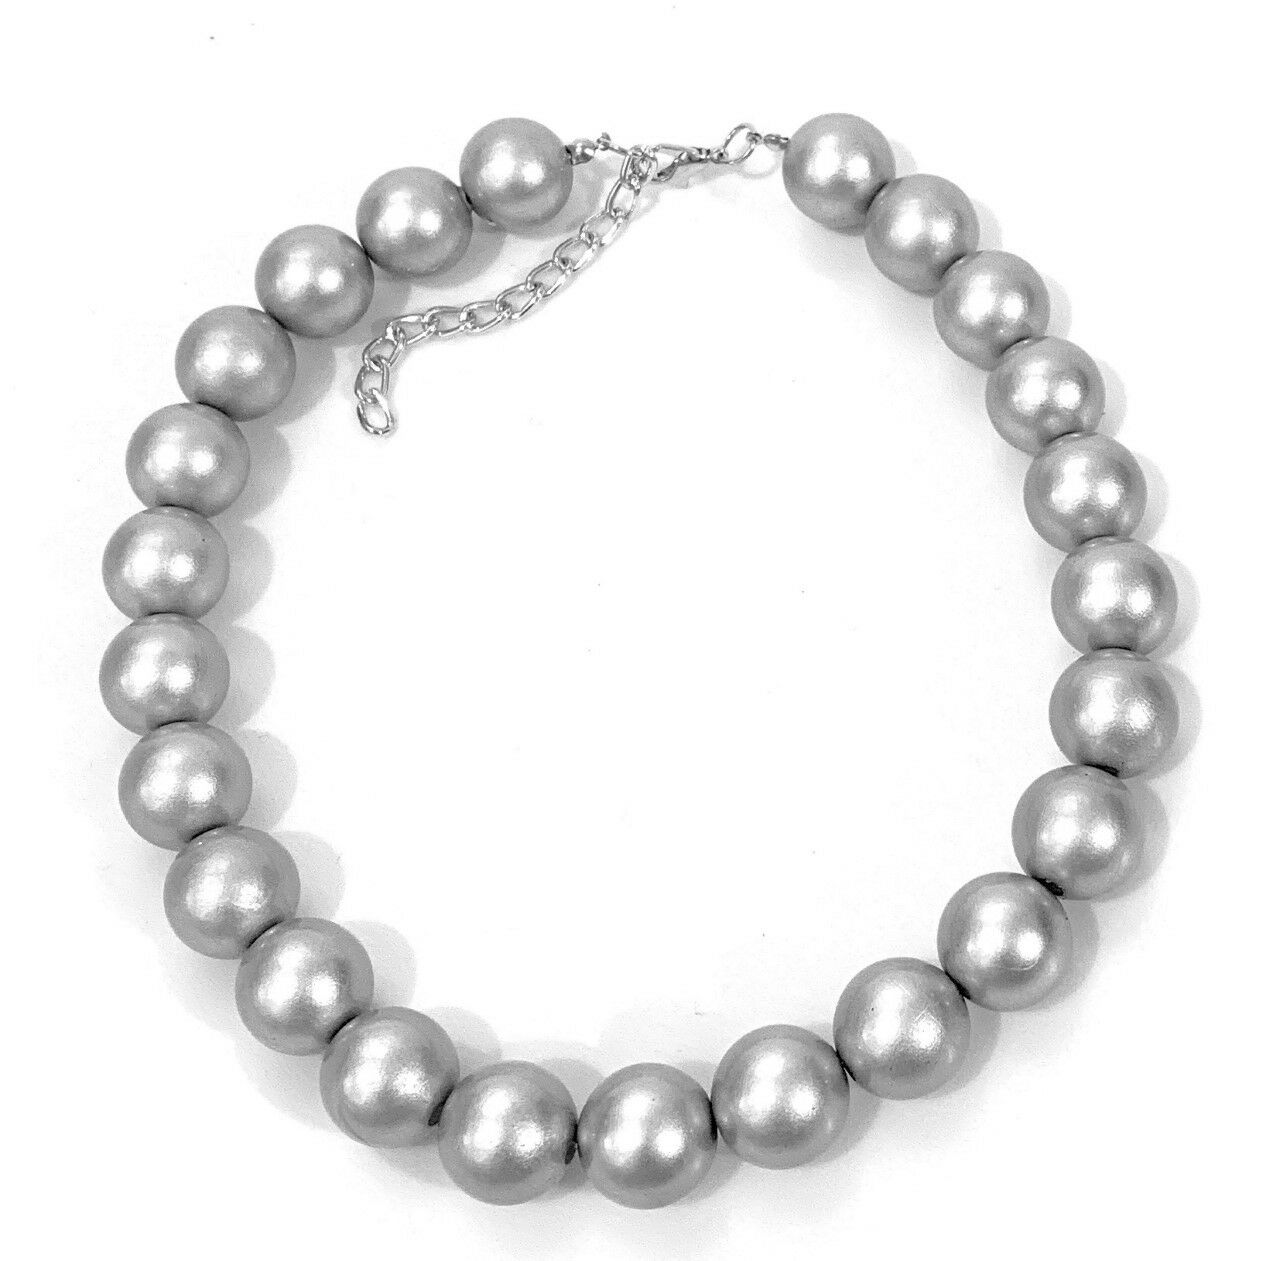 Large 18mm Faux Pearl Bead Chain Vintage Statement Great Gatsby Necklace Choker